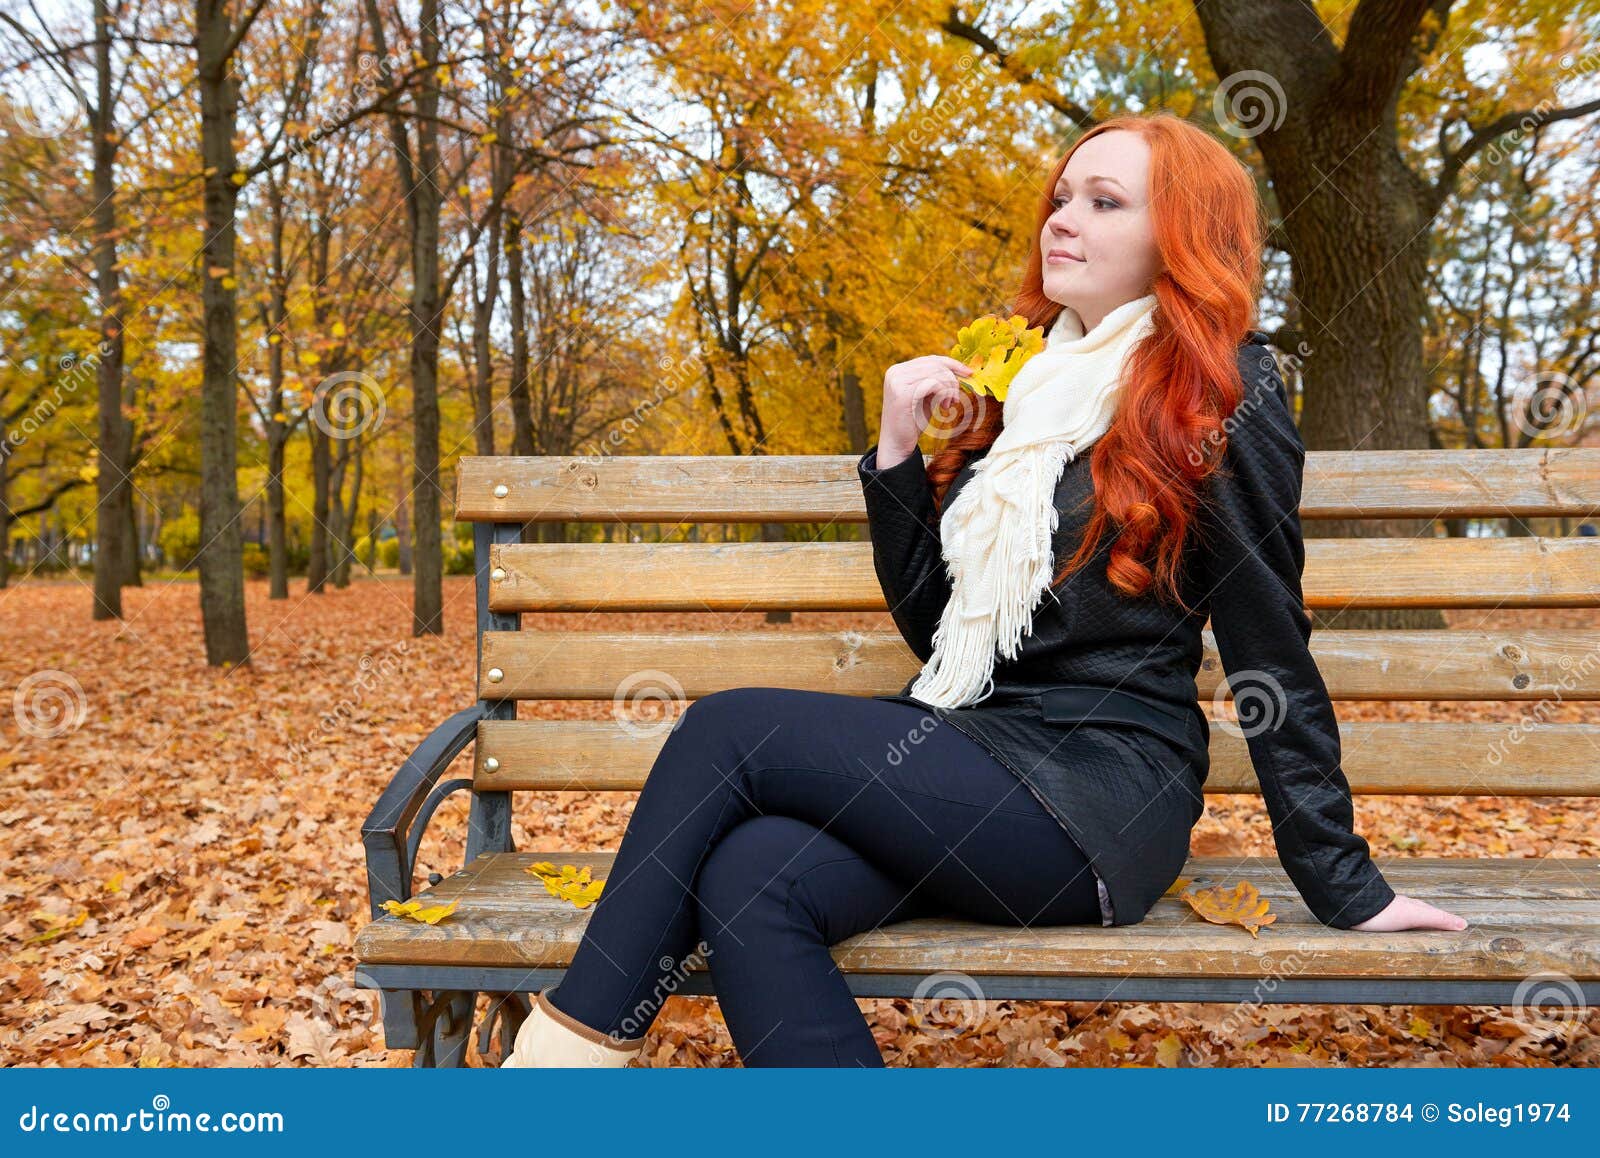 Beautiful Young Girl Portrait Sit on Bench in Park with Yellow Leaf in ...